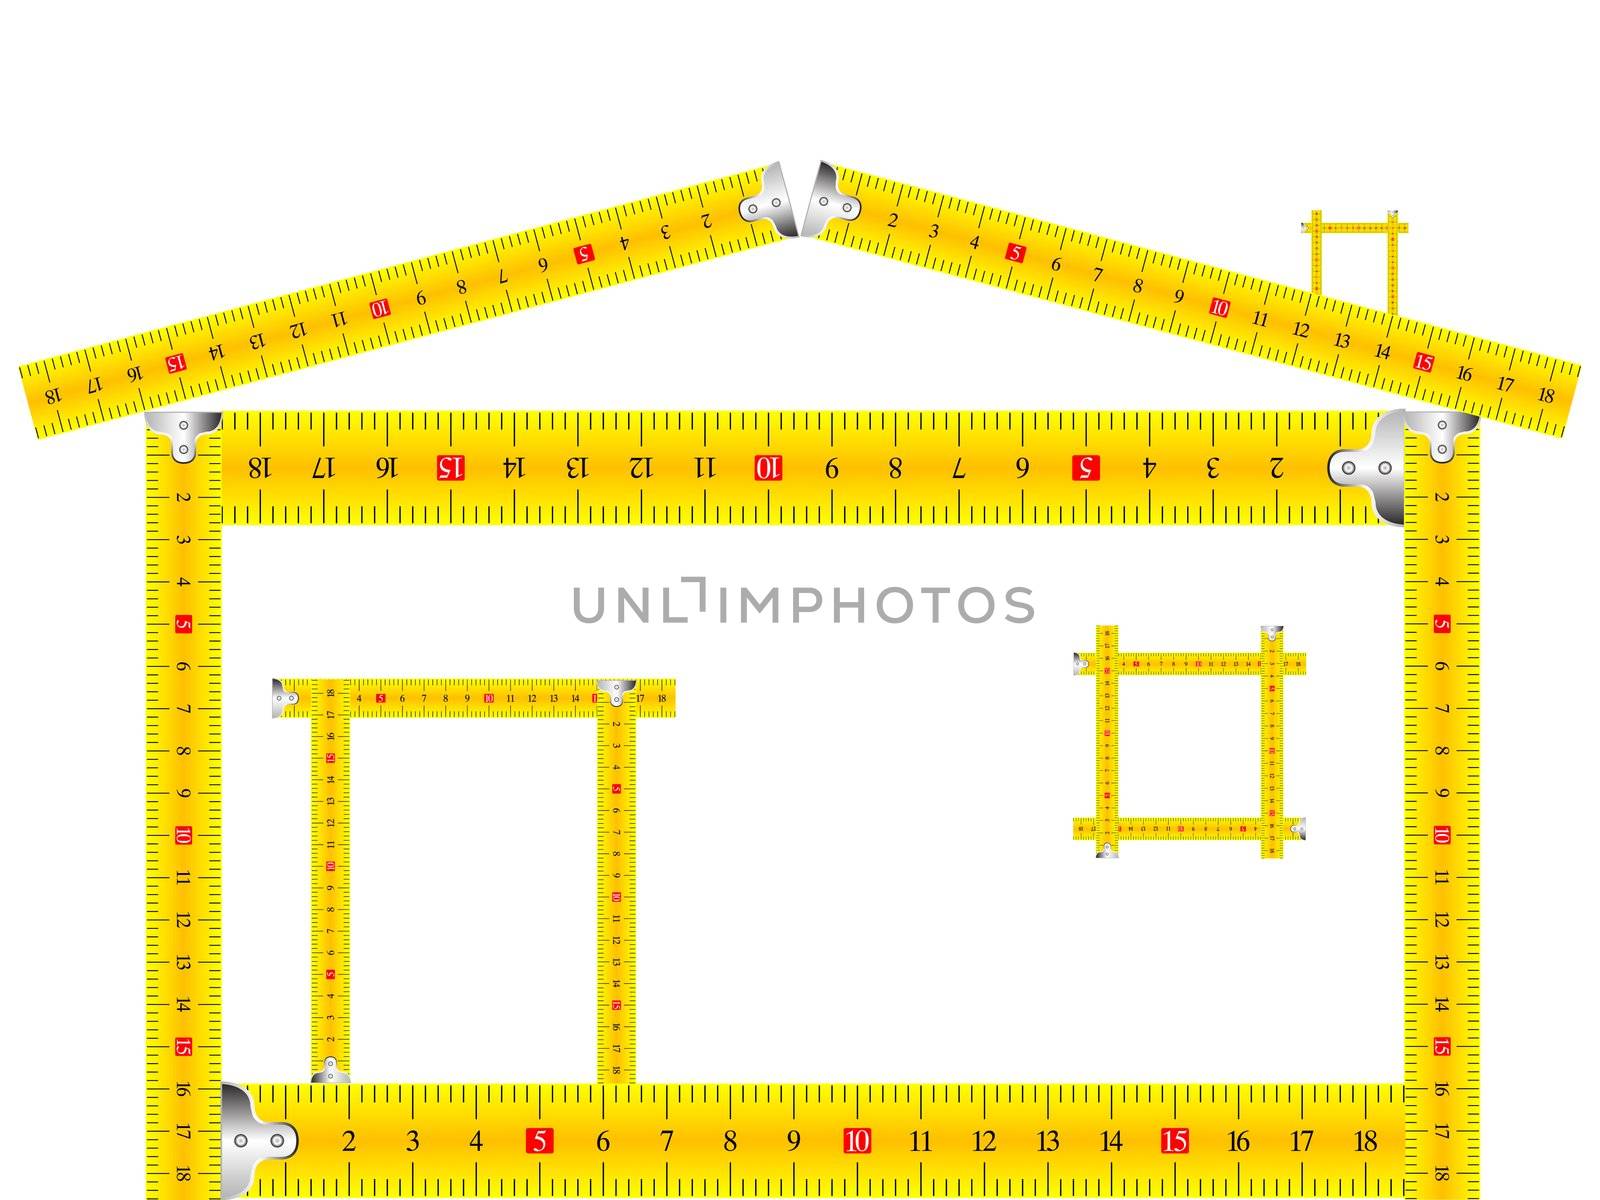 house made of measuring tape against white background, abstract vector art illustration